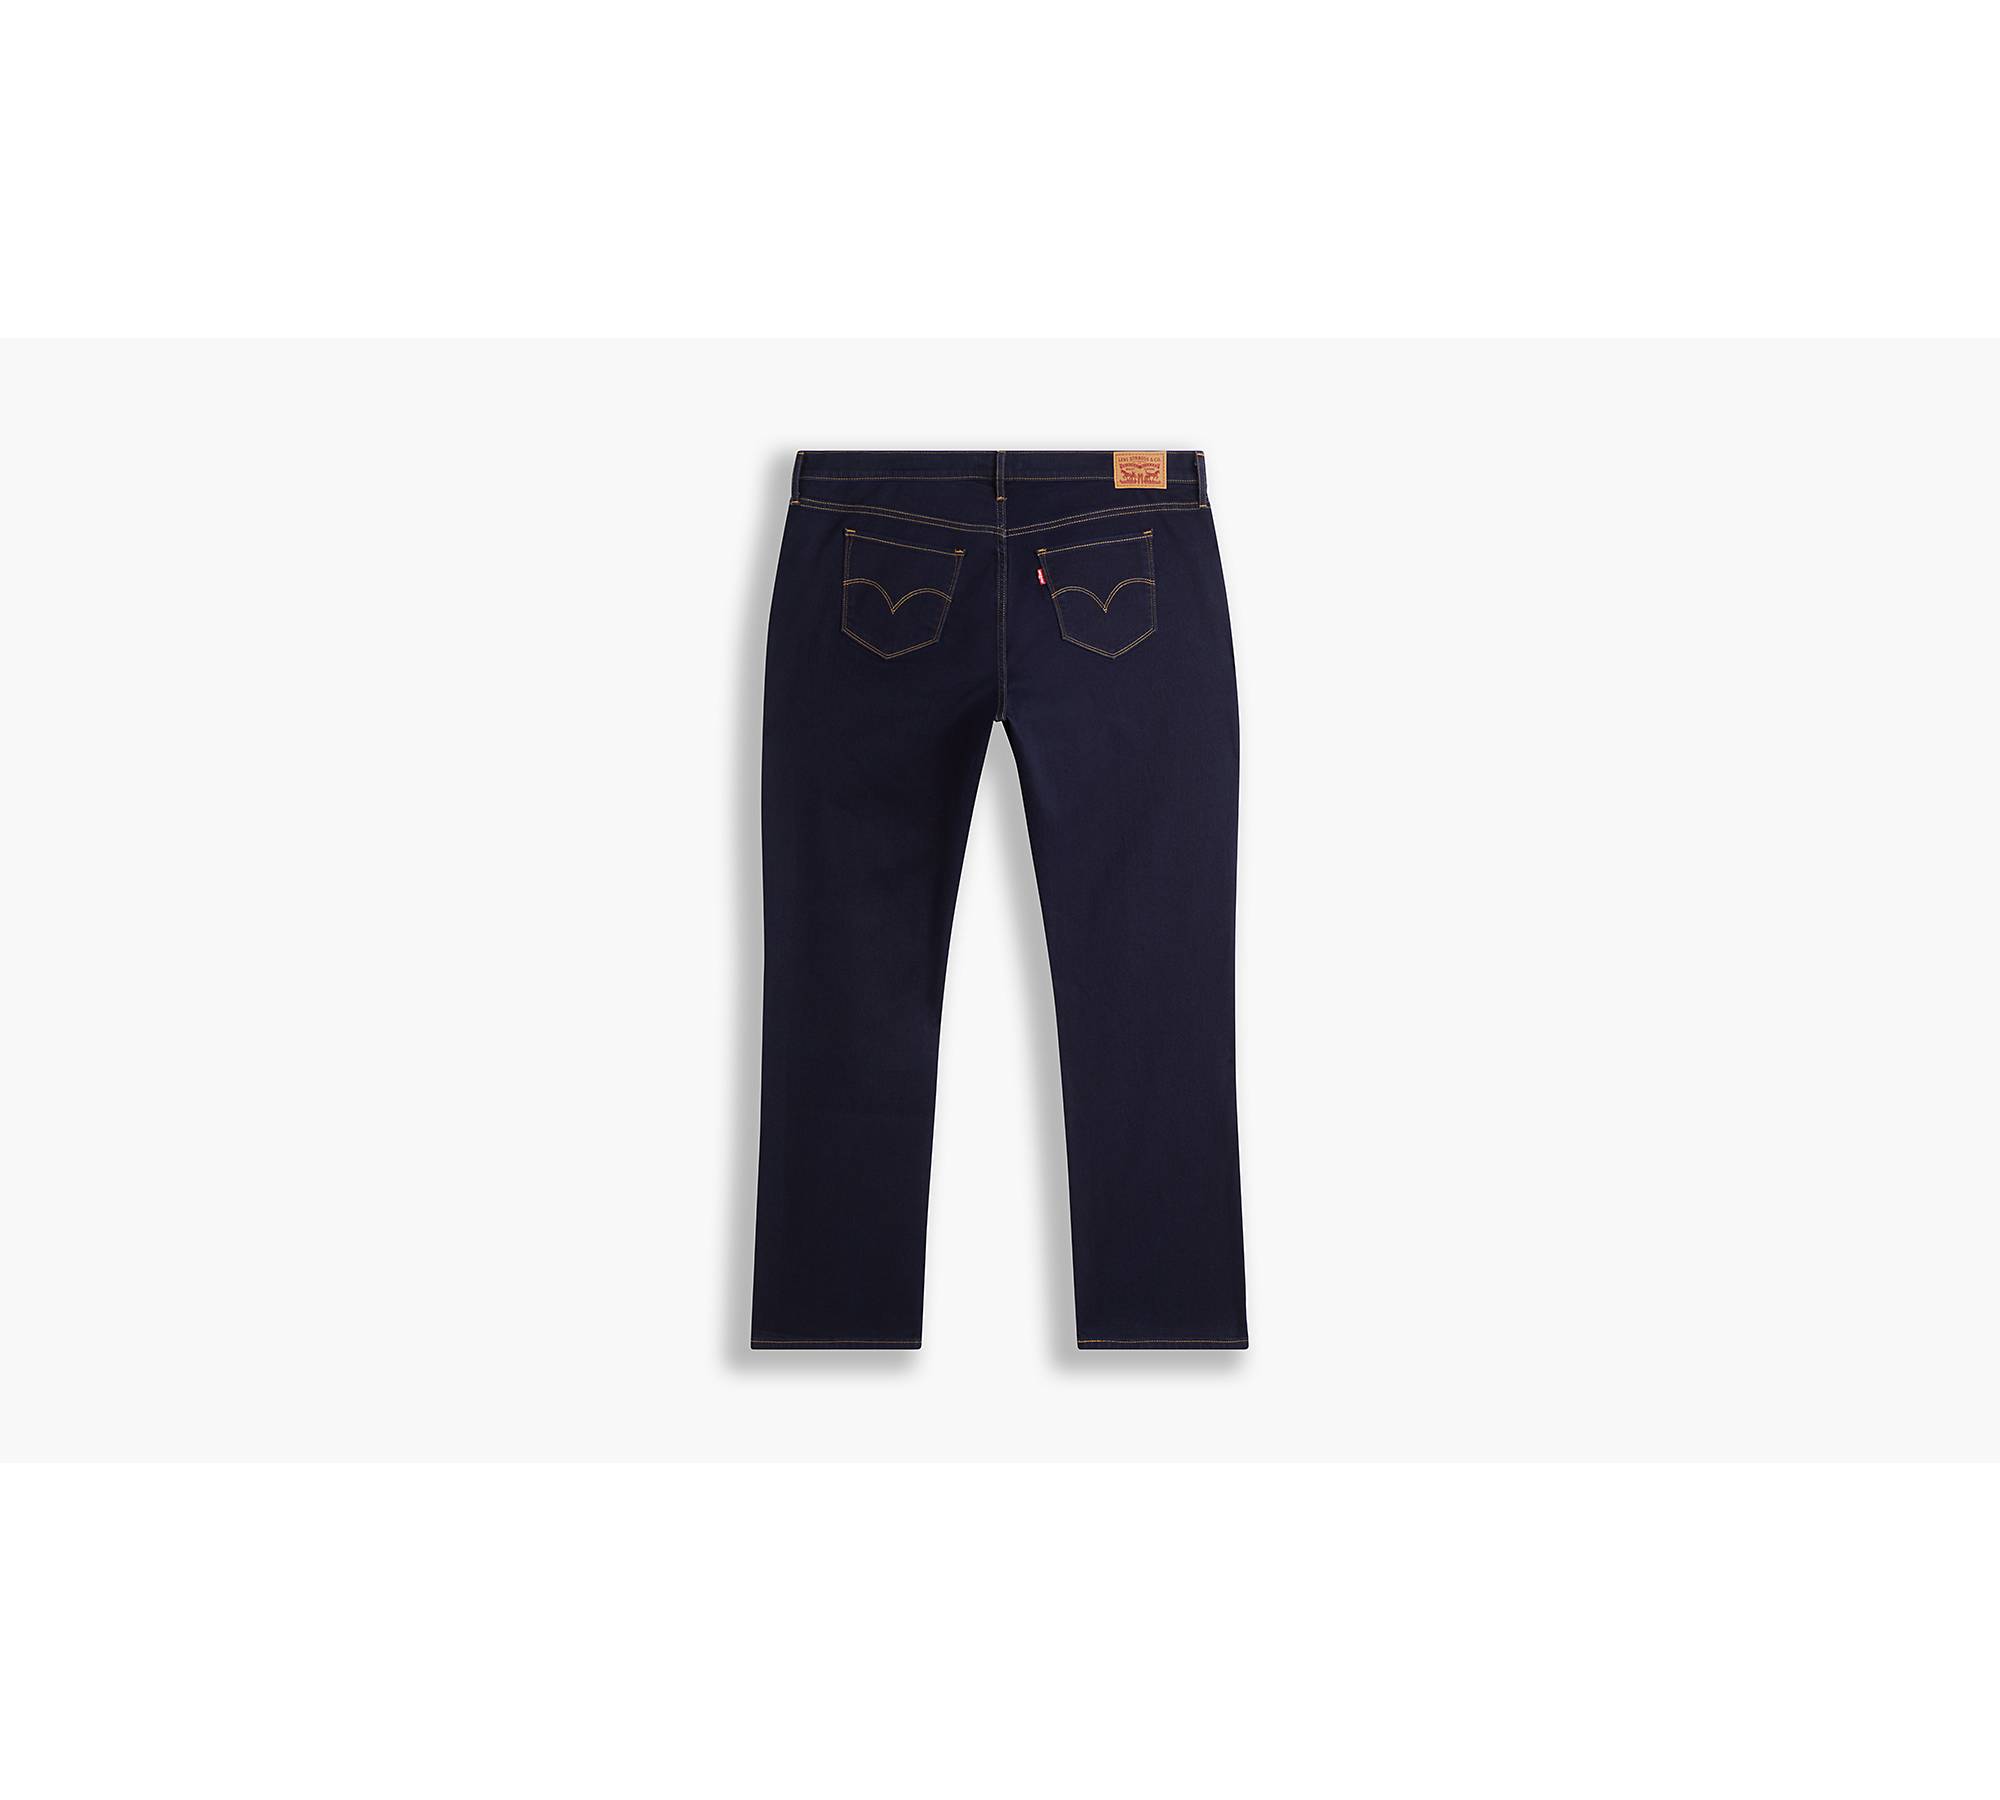 Signature by Levi Strauss & Co. Women's Outdoors Everyday Hiking Pants 